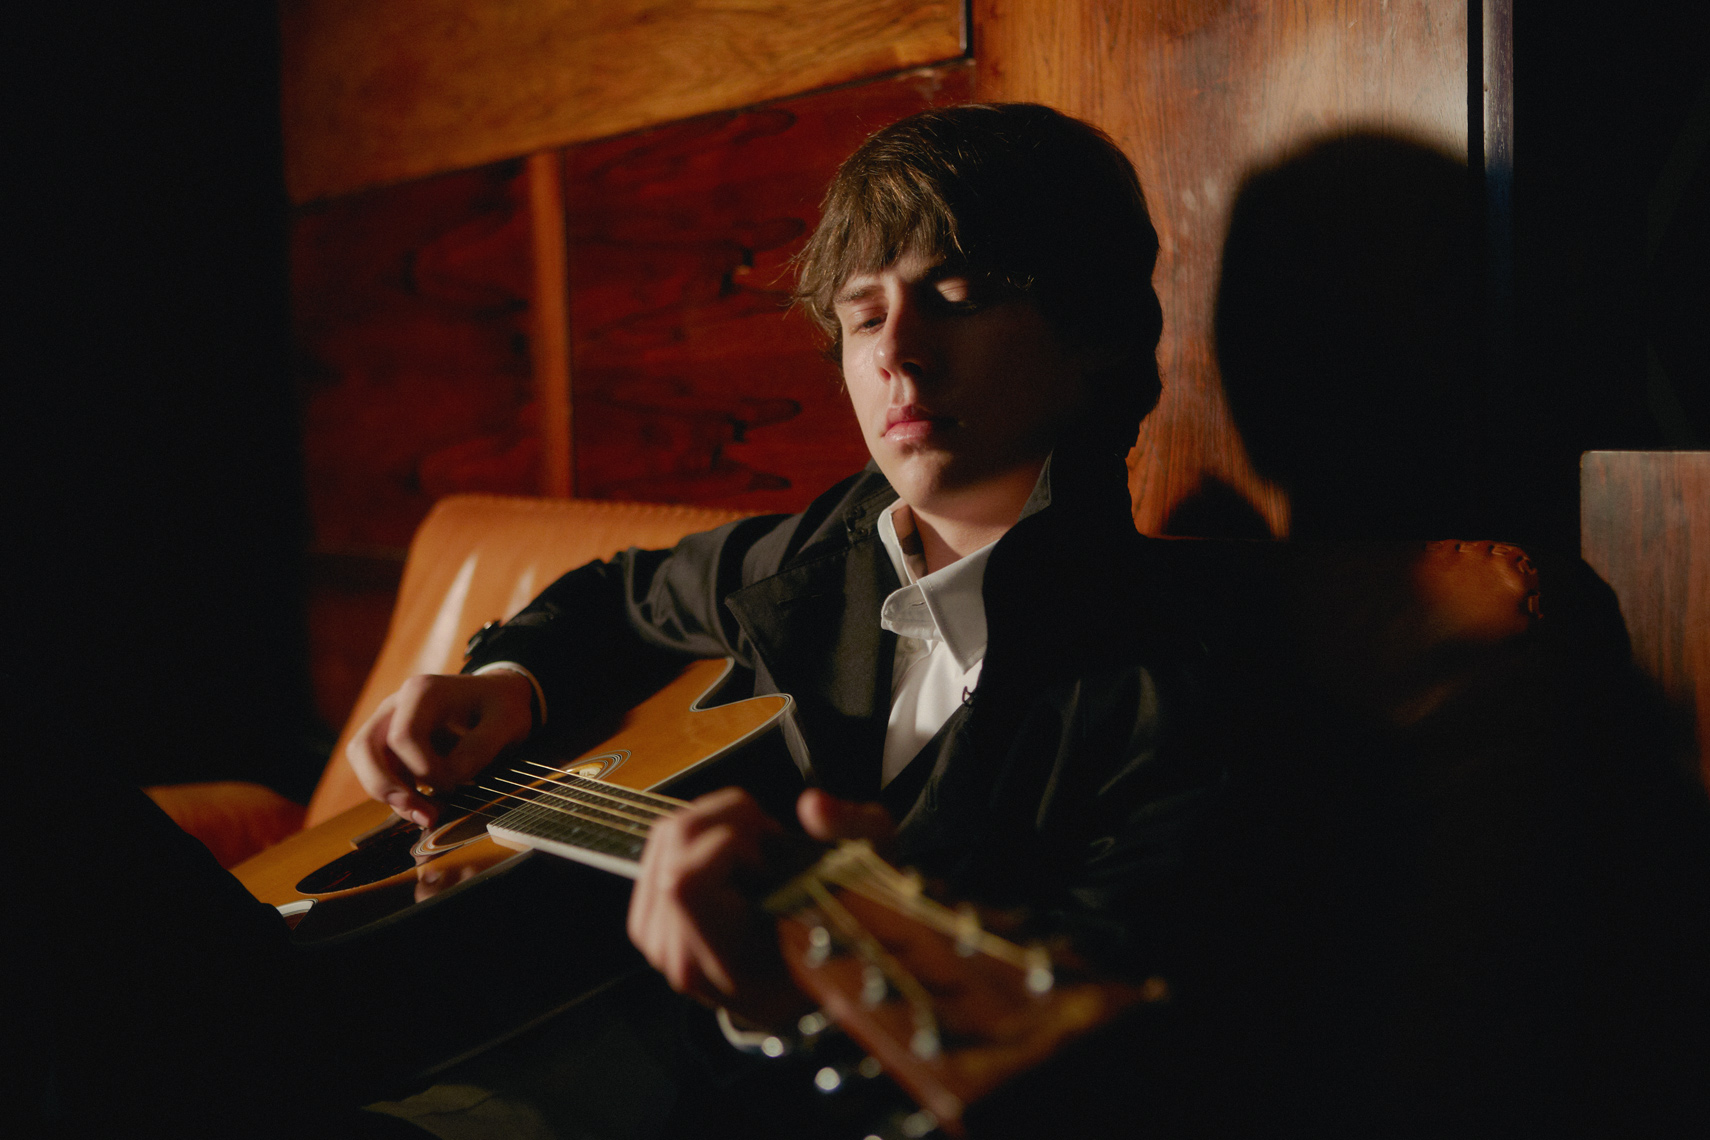 Jake Bugg photographed by Tom Oxley